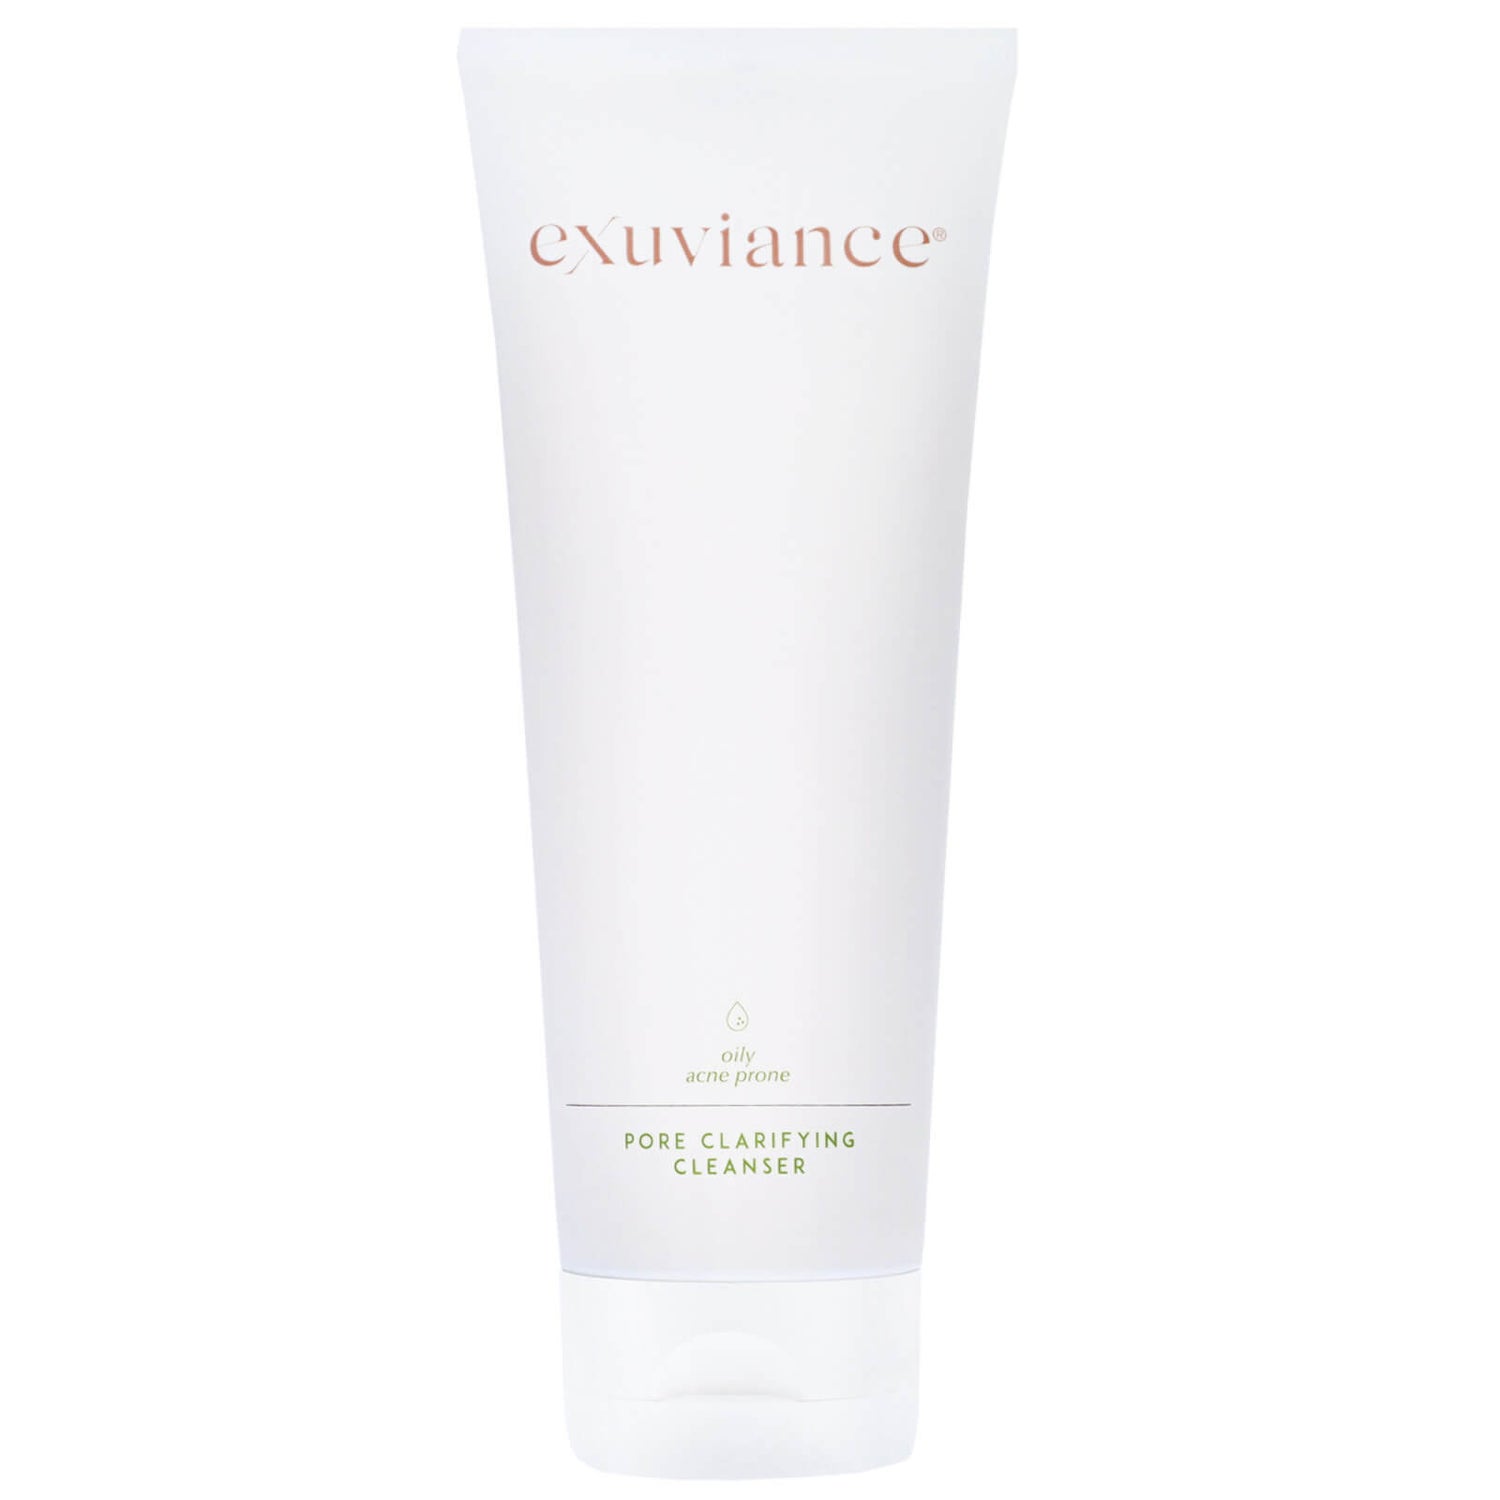 Exuviance Pore Clarifying Cleanser (7.2 oz.)